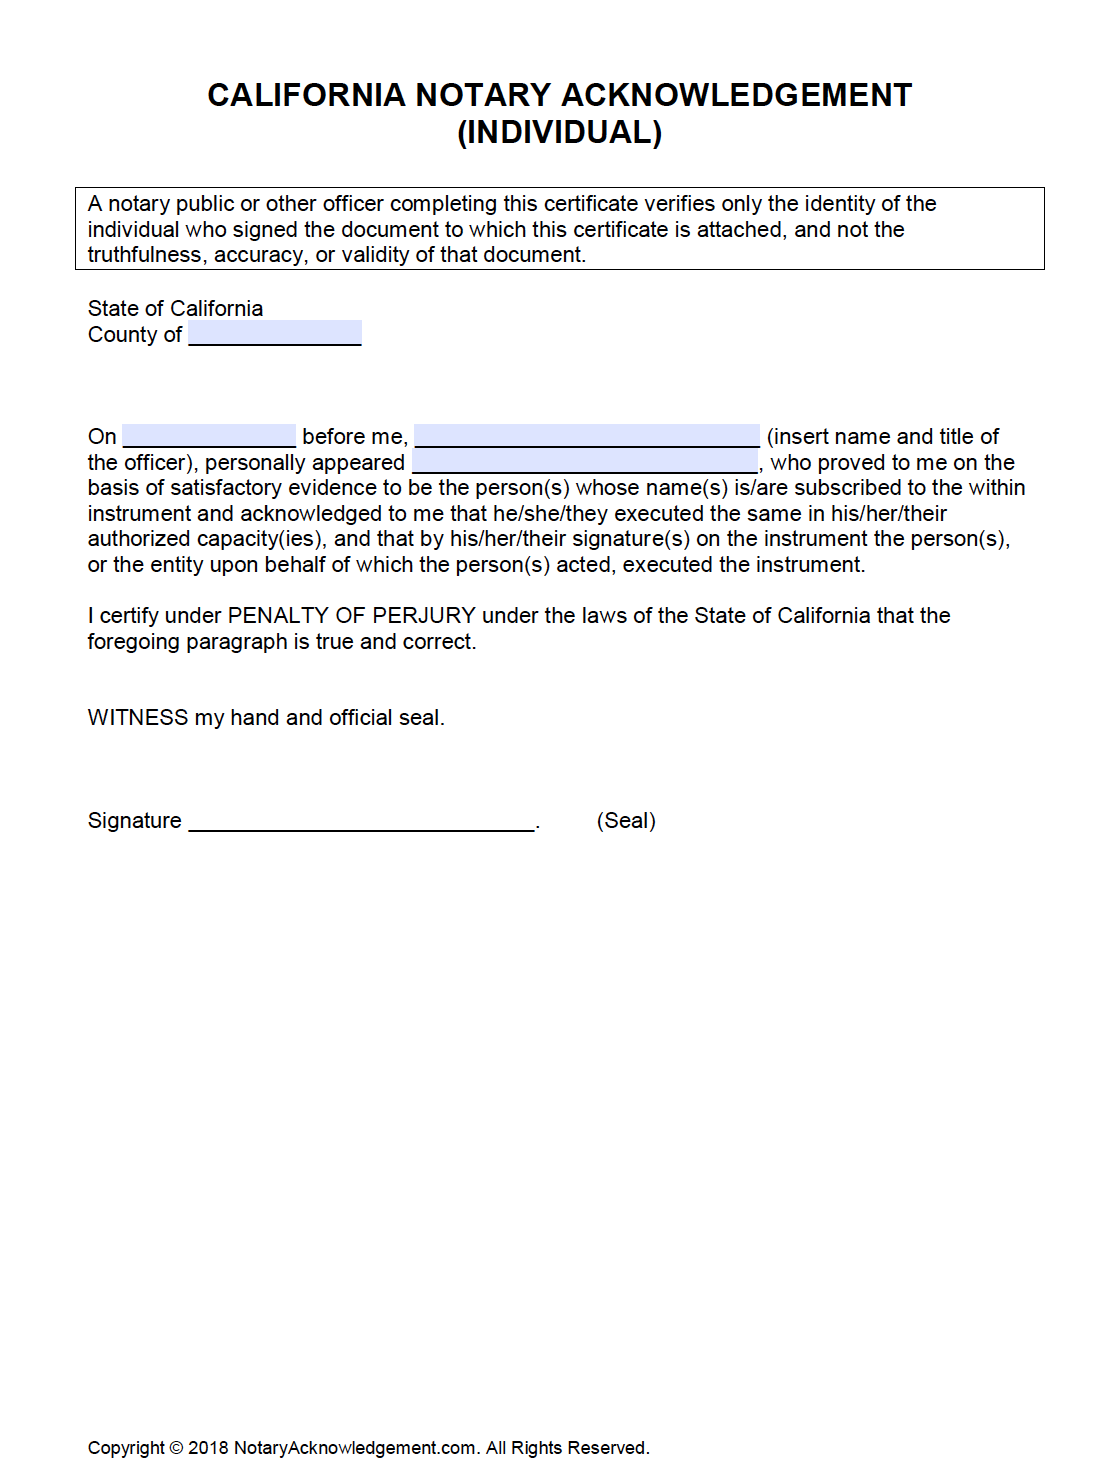 Free California Notary Acknowledgement Individual PDF Word